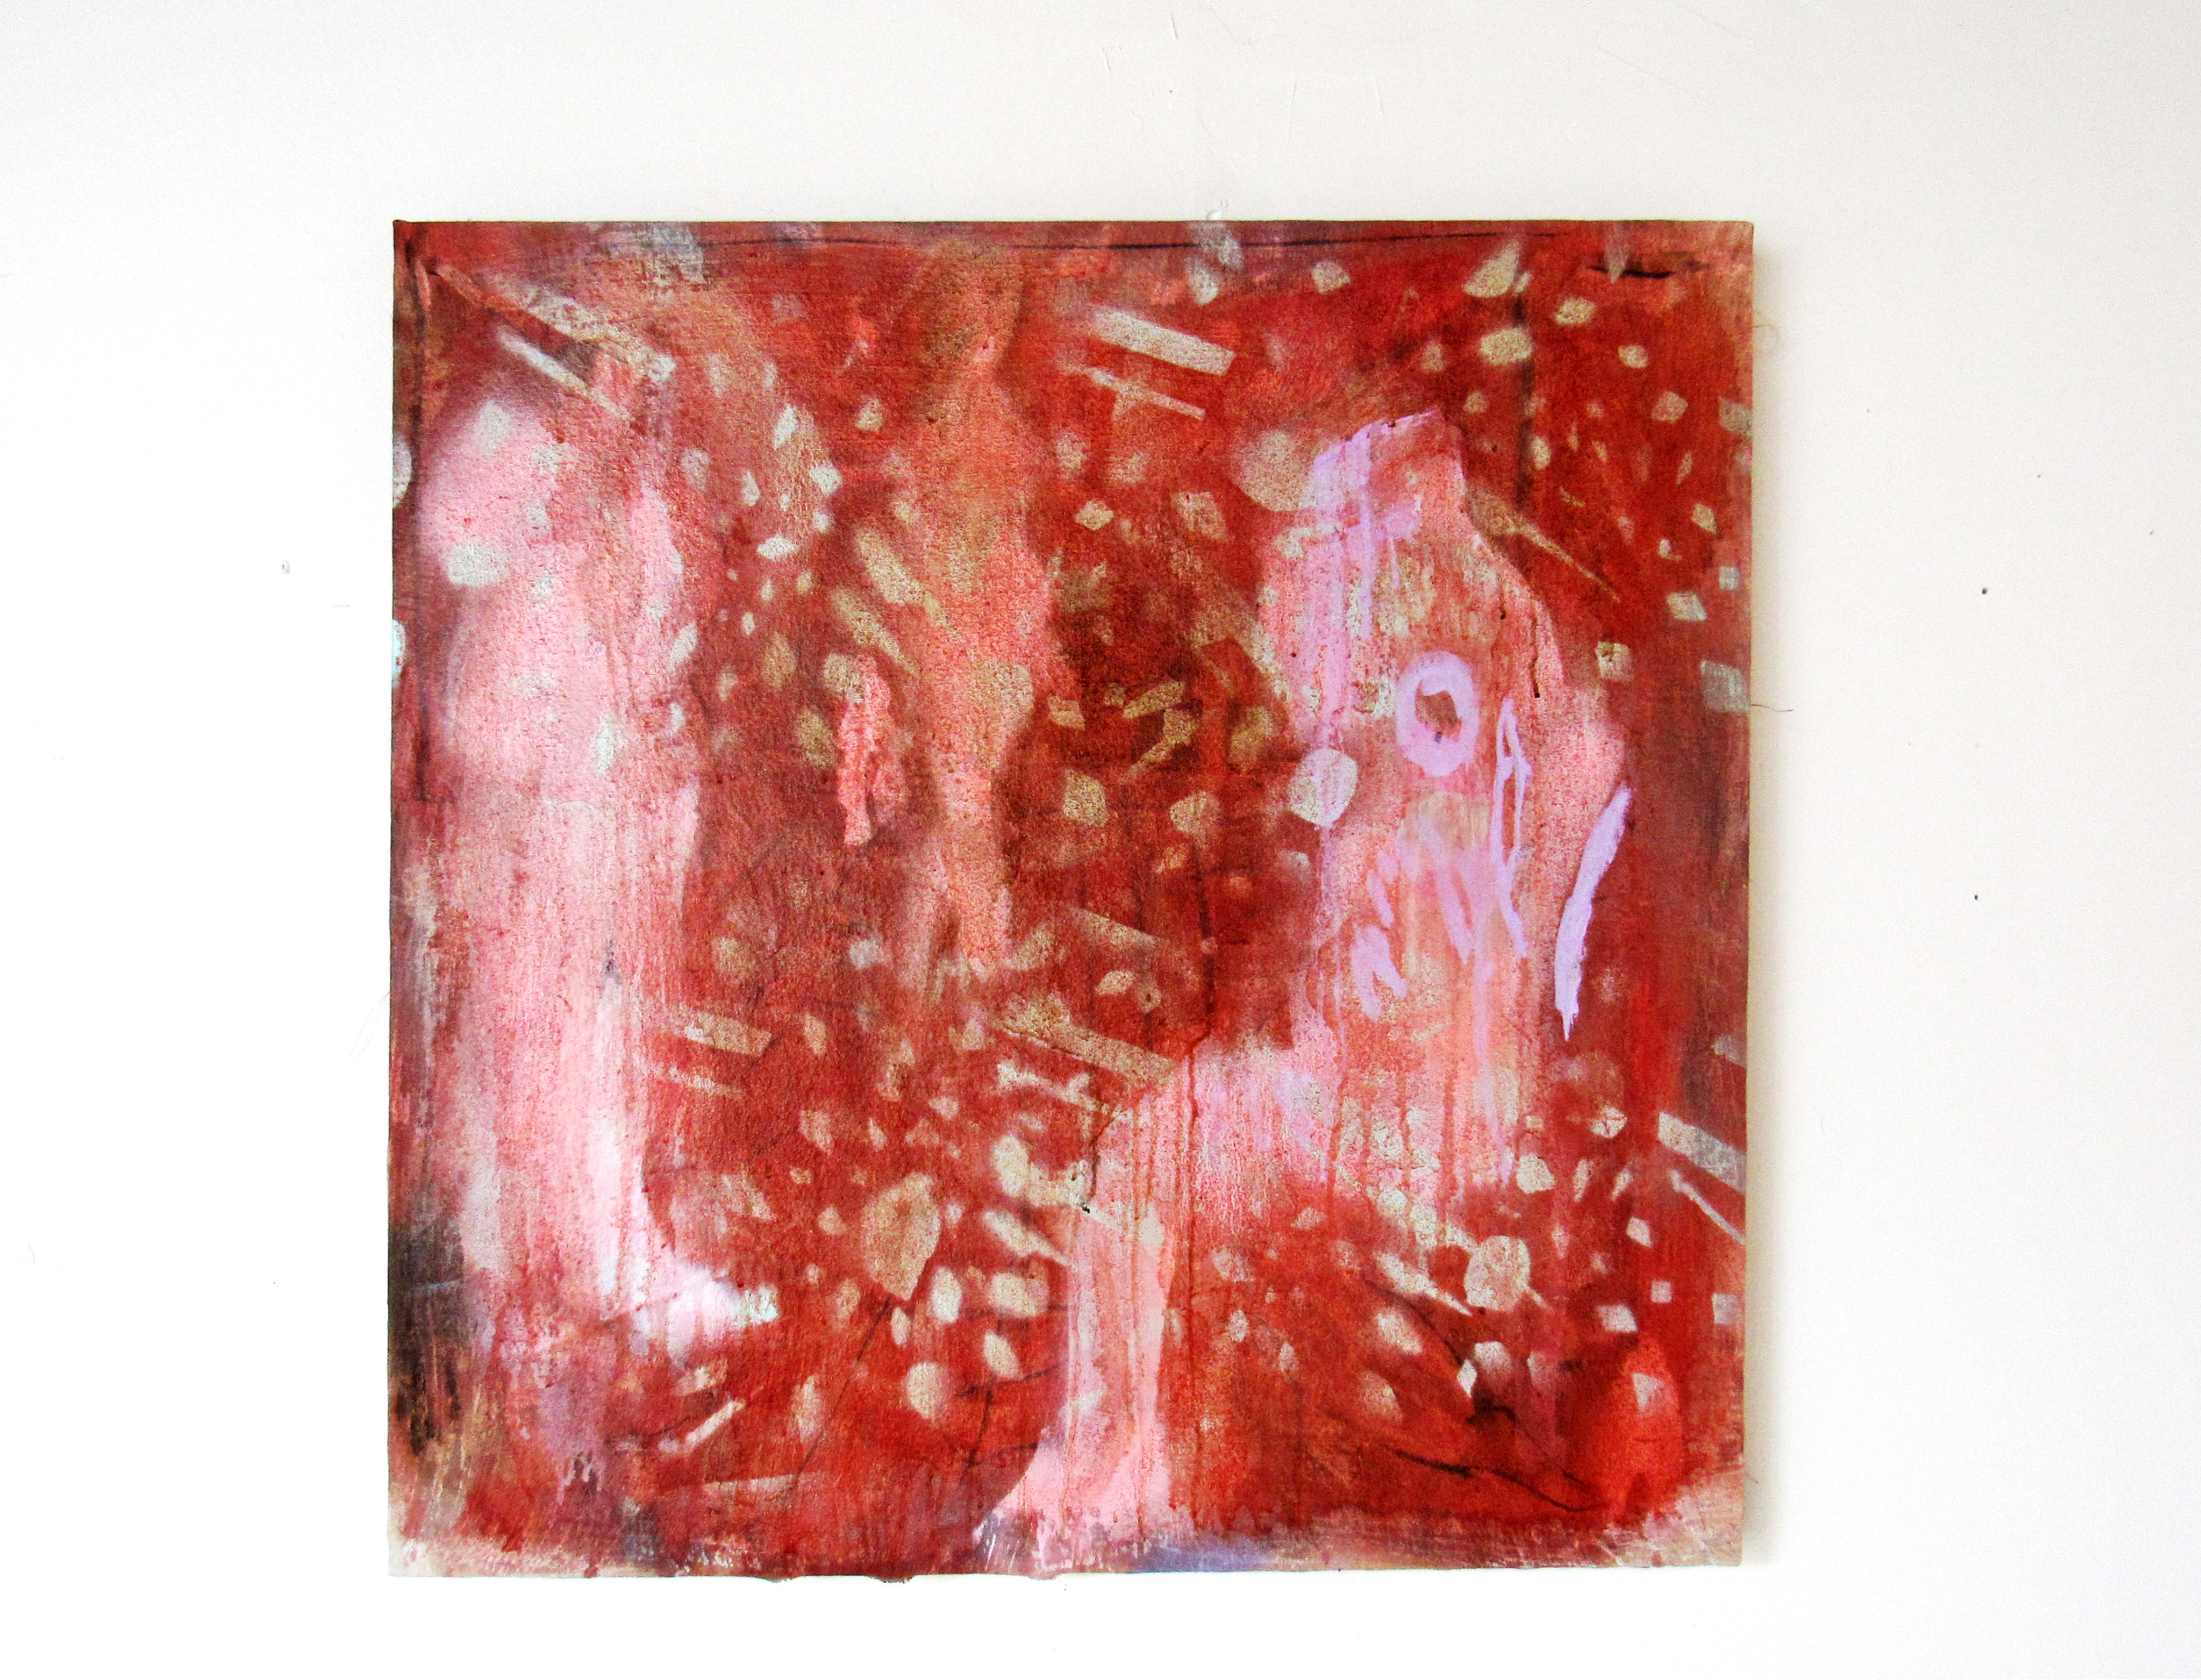 Eurydice, red gestural abstract w figures - Painting by C. Dimitri